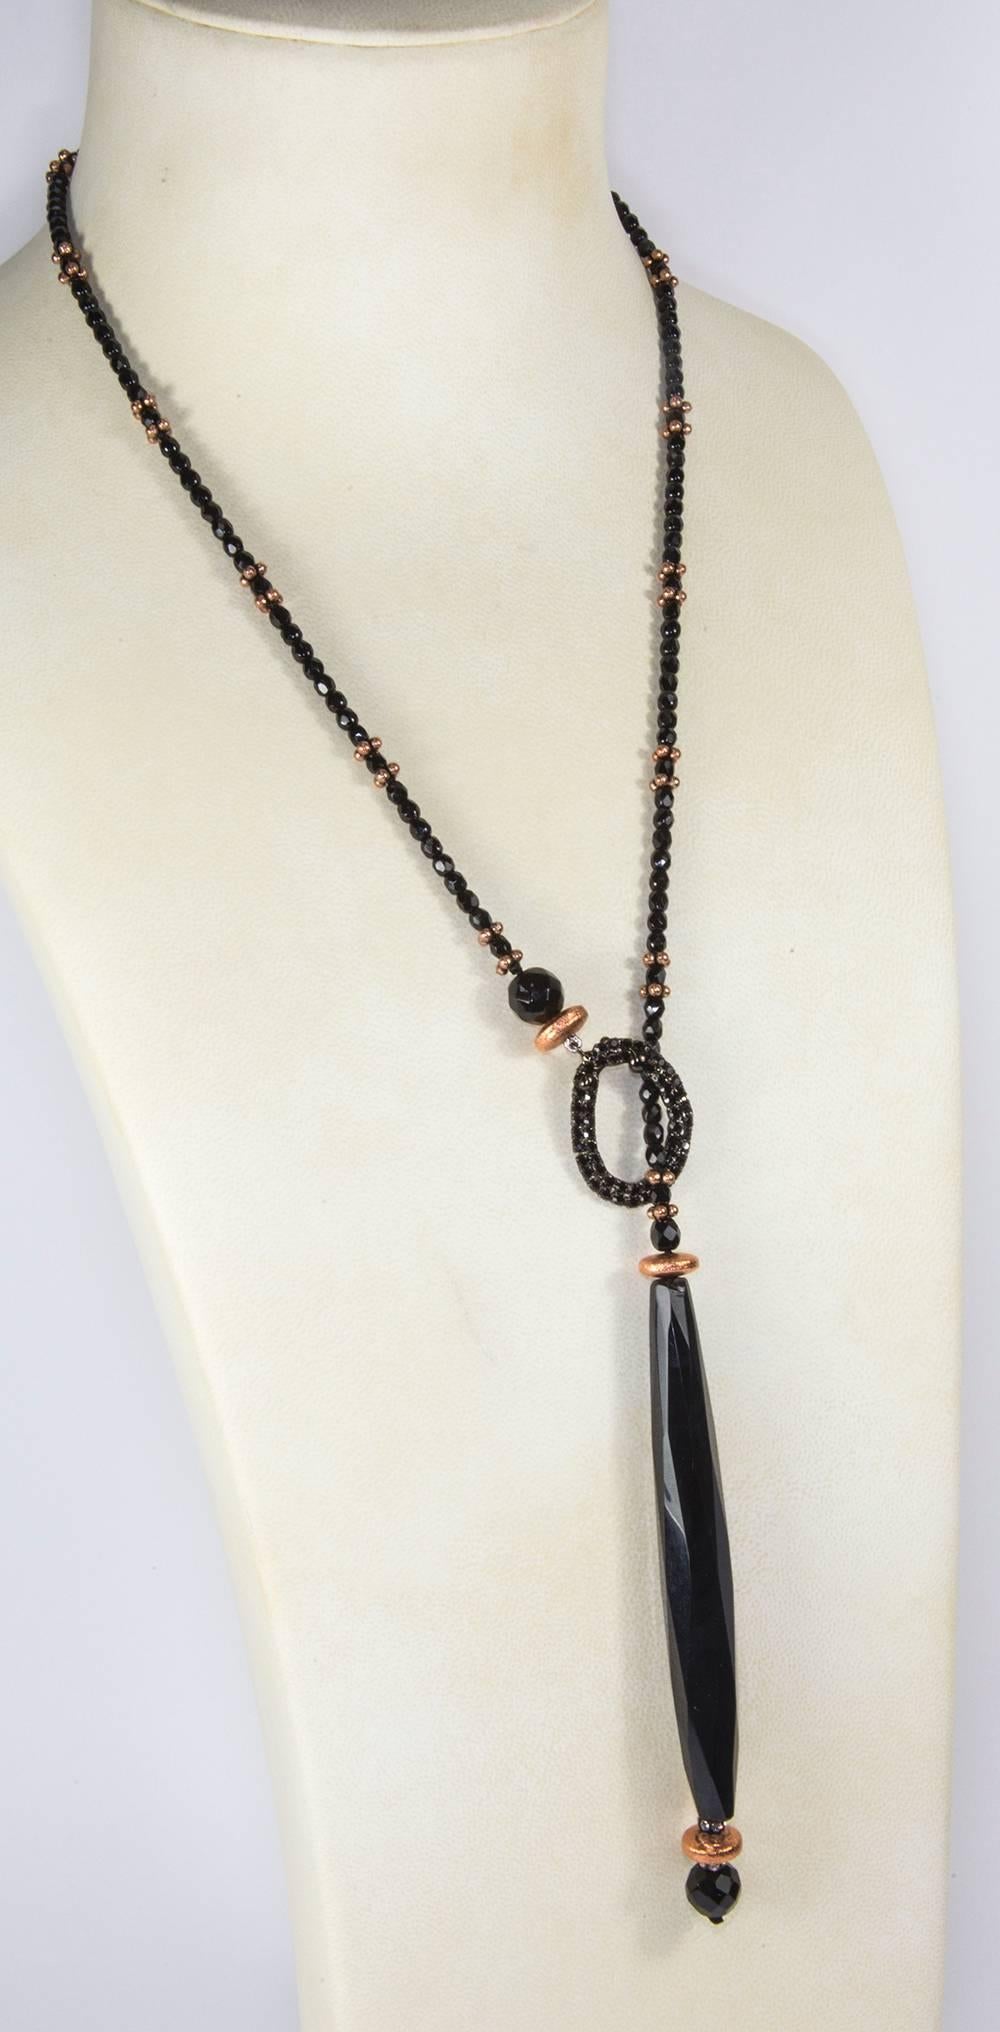 Soft faceted sheen Black Jet Lariat Necklace, accented by copper rondelles and sparkling CZ stones, suspending a large faceted elongated teardrop shaped Jet glass bead, measuring approx. 4” in length; approx. length of necklace: 24”. Vintage beads